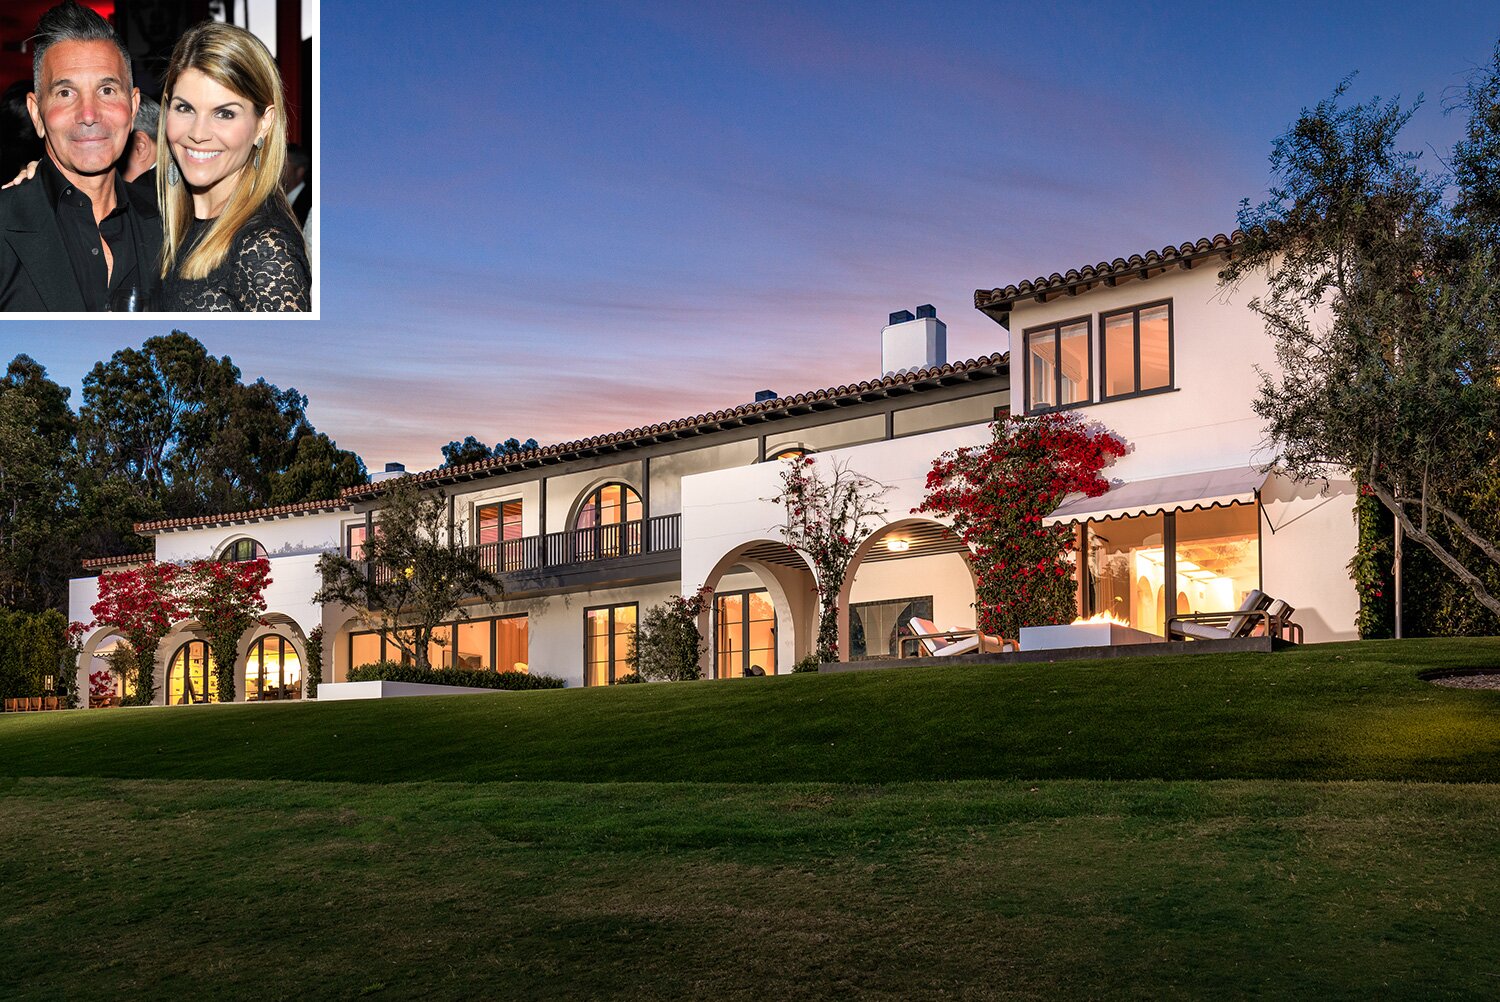 MDLLA’s Josh Flagg on Sale of Lori Loughlin’s $18.75M Mansion: ‘They Have Impeccable Taste’